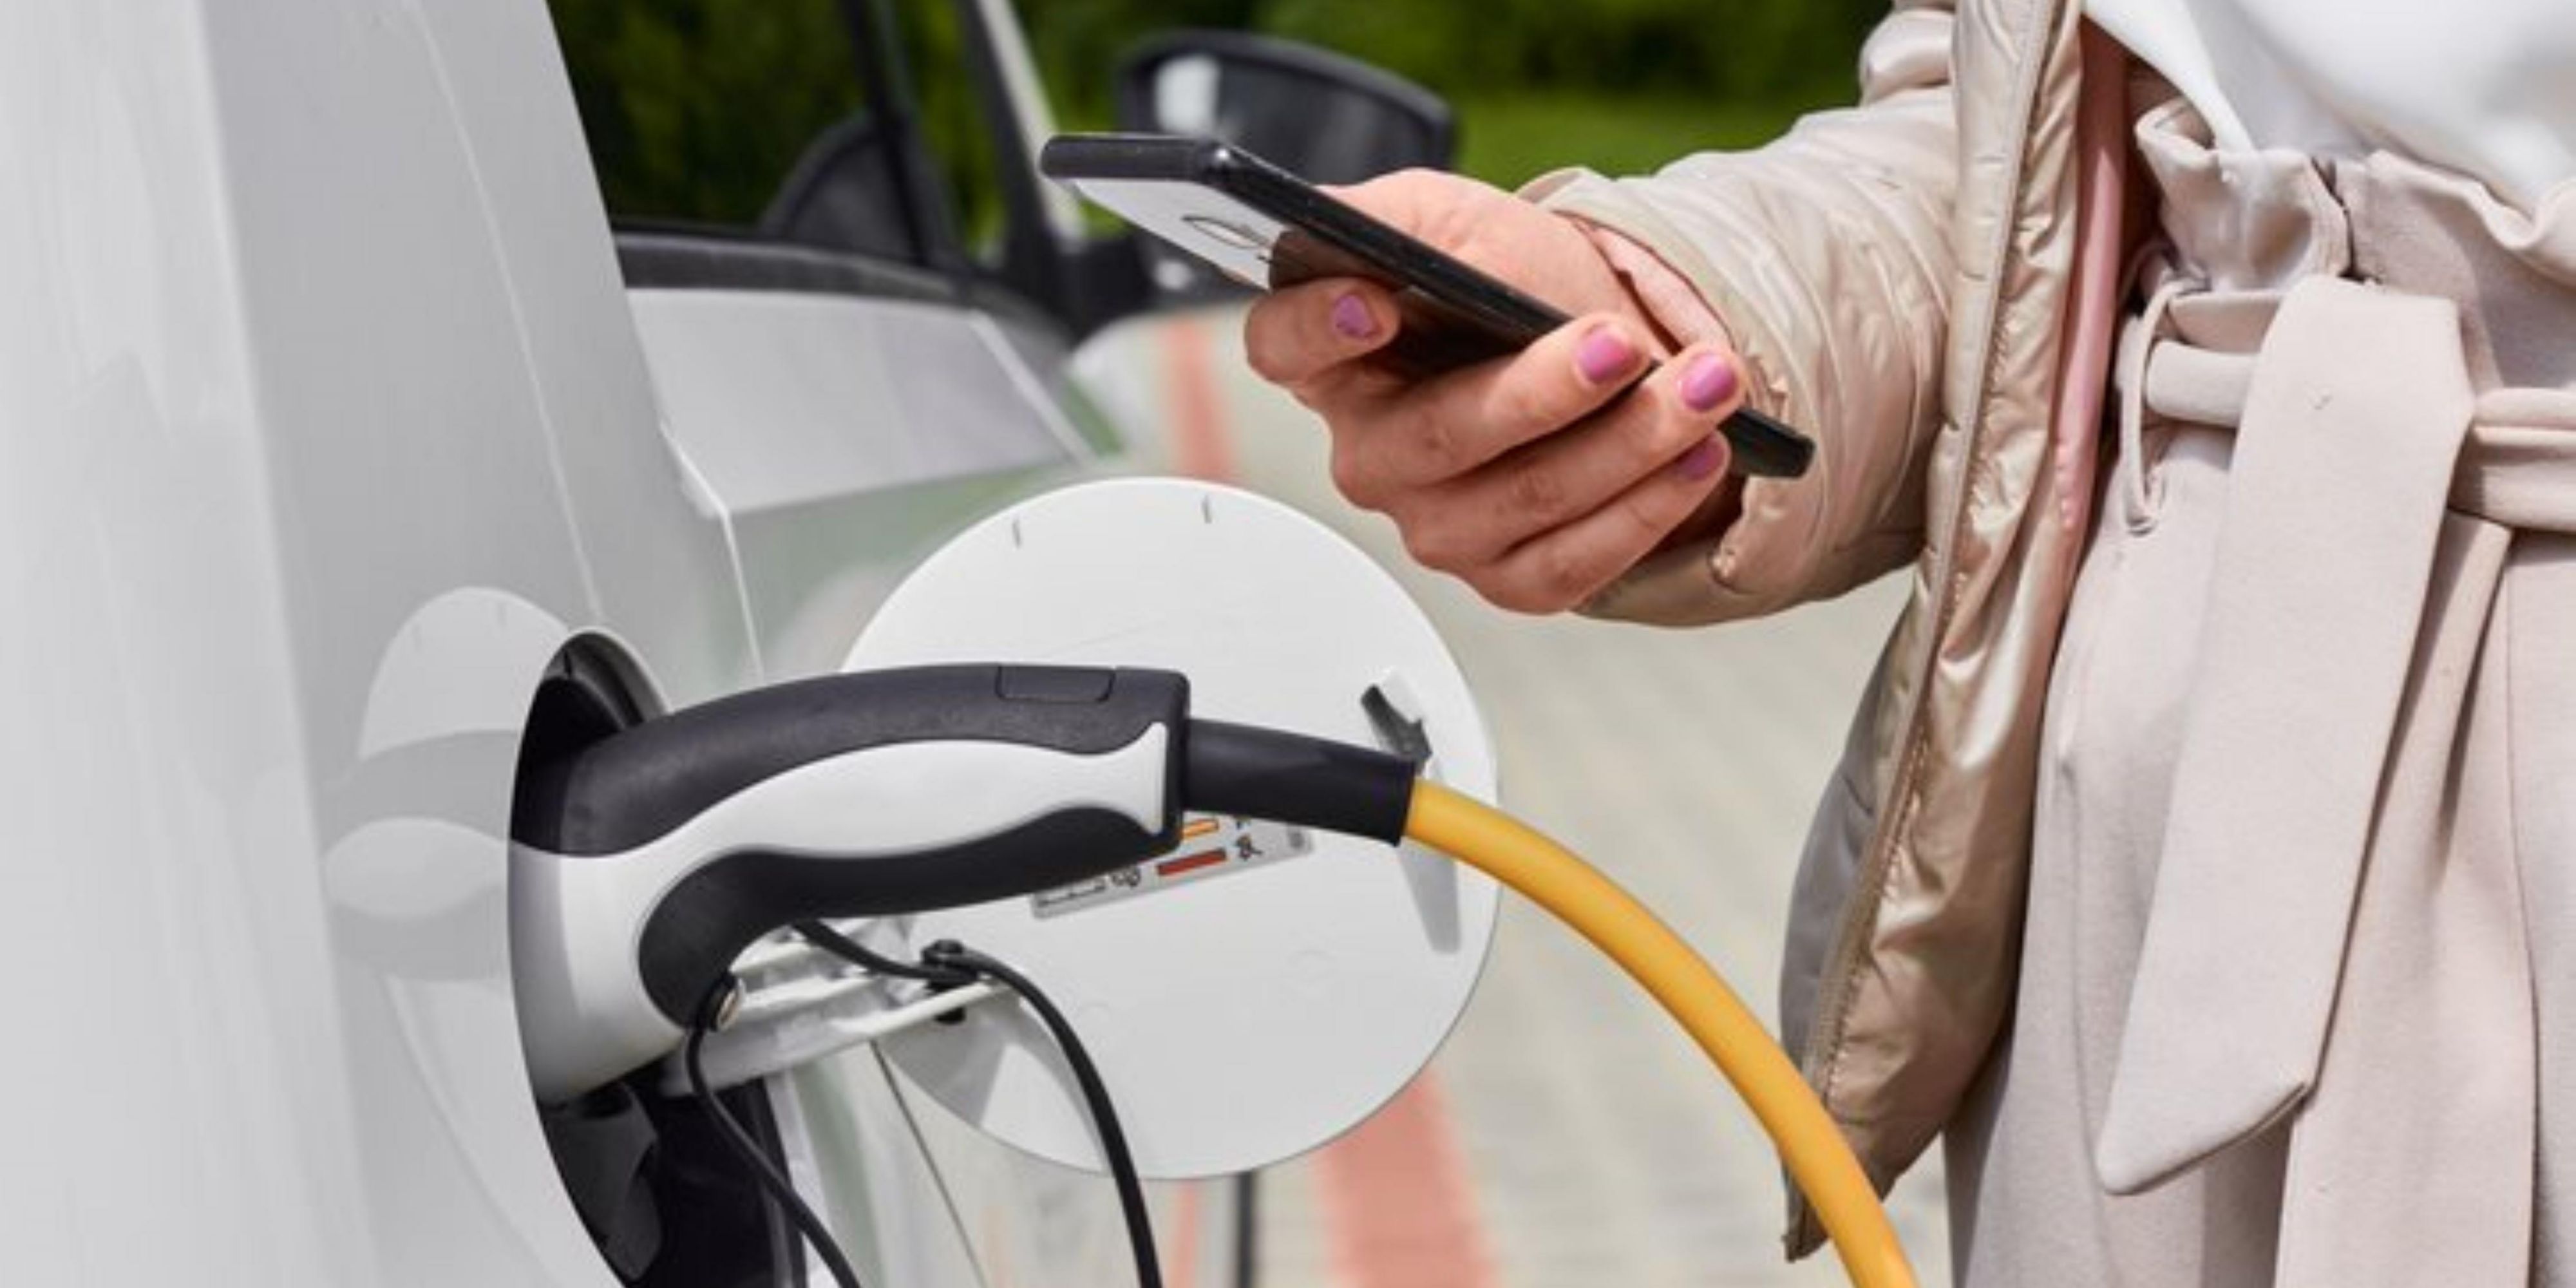 If you drive an electric vehicle, visit one of our convenient electronic charging stations during your stay.